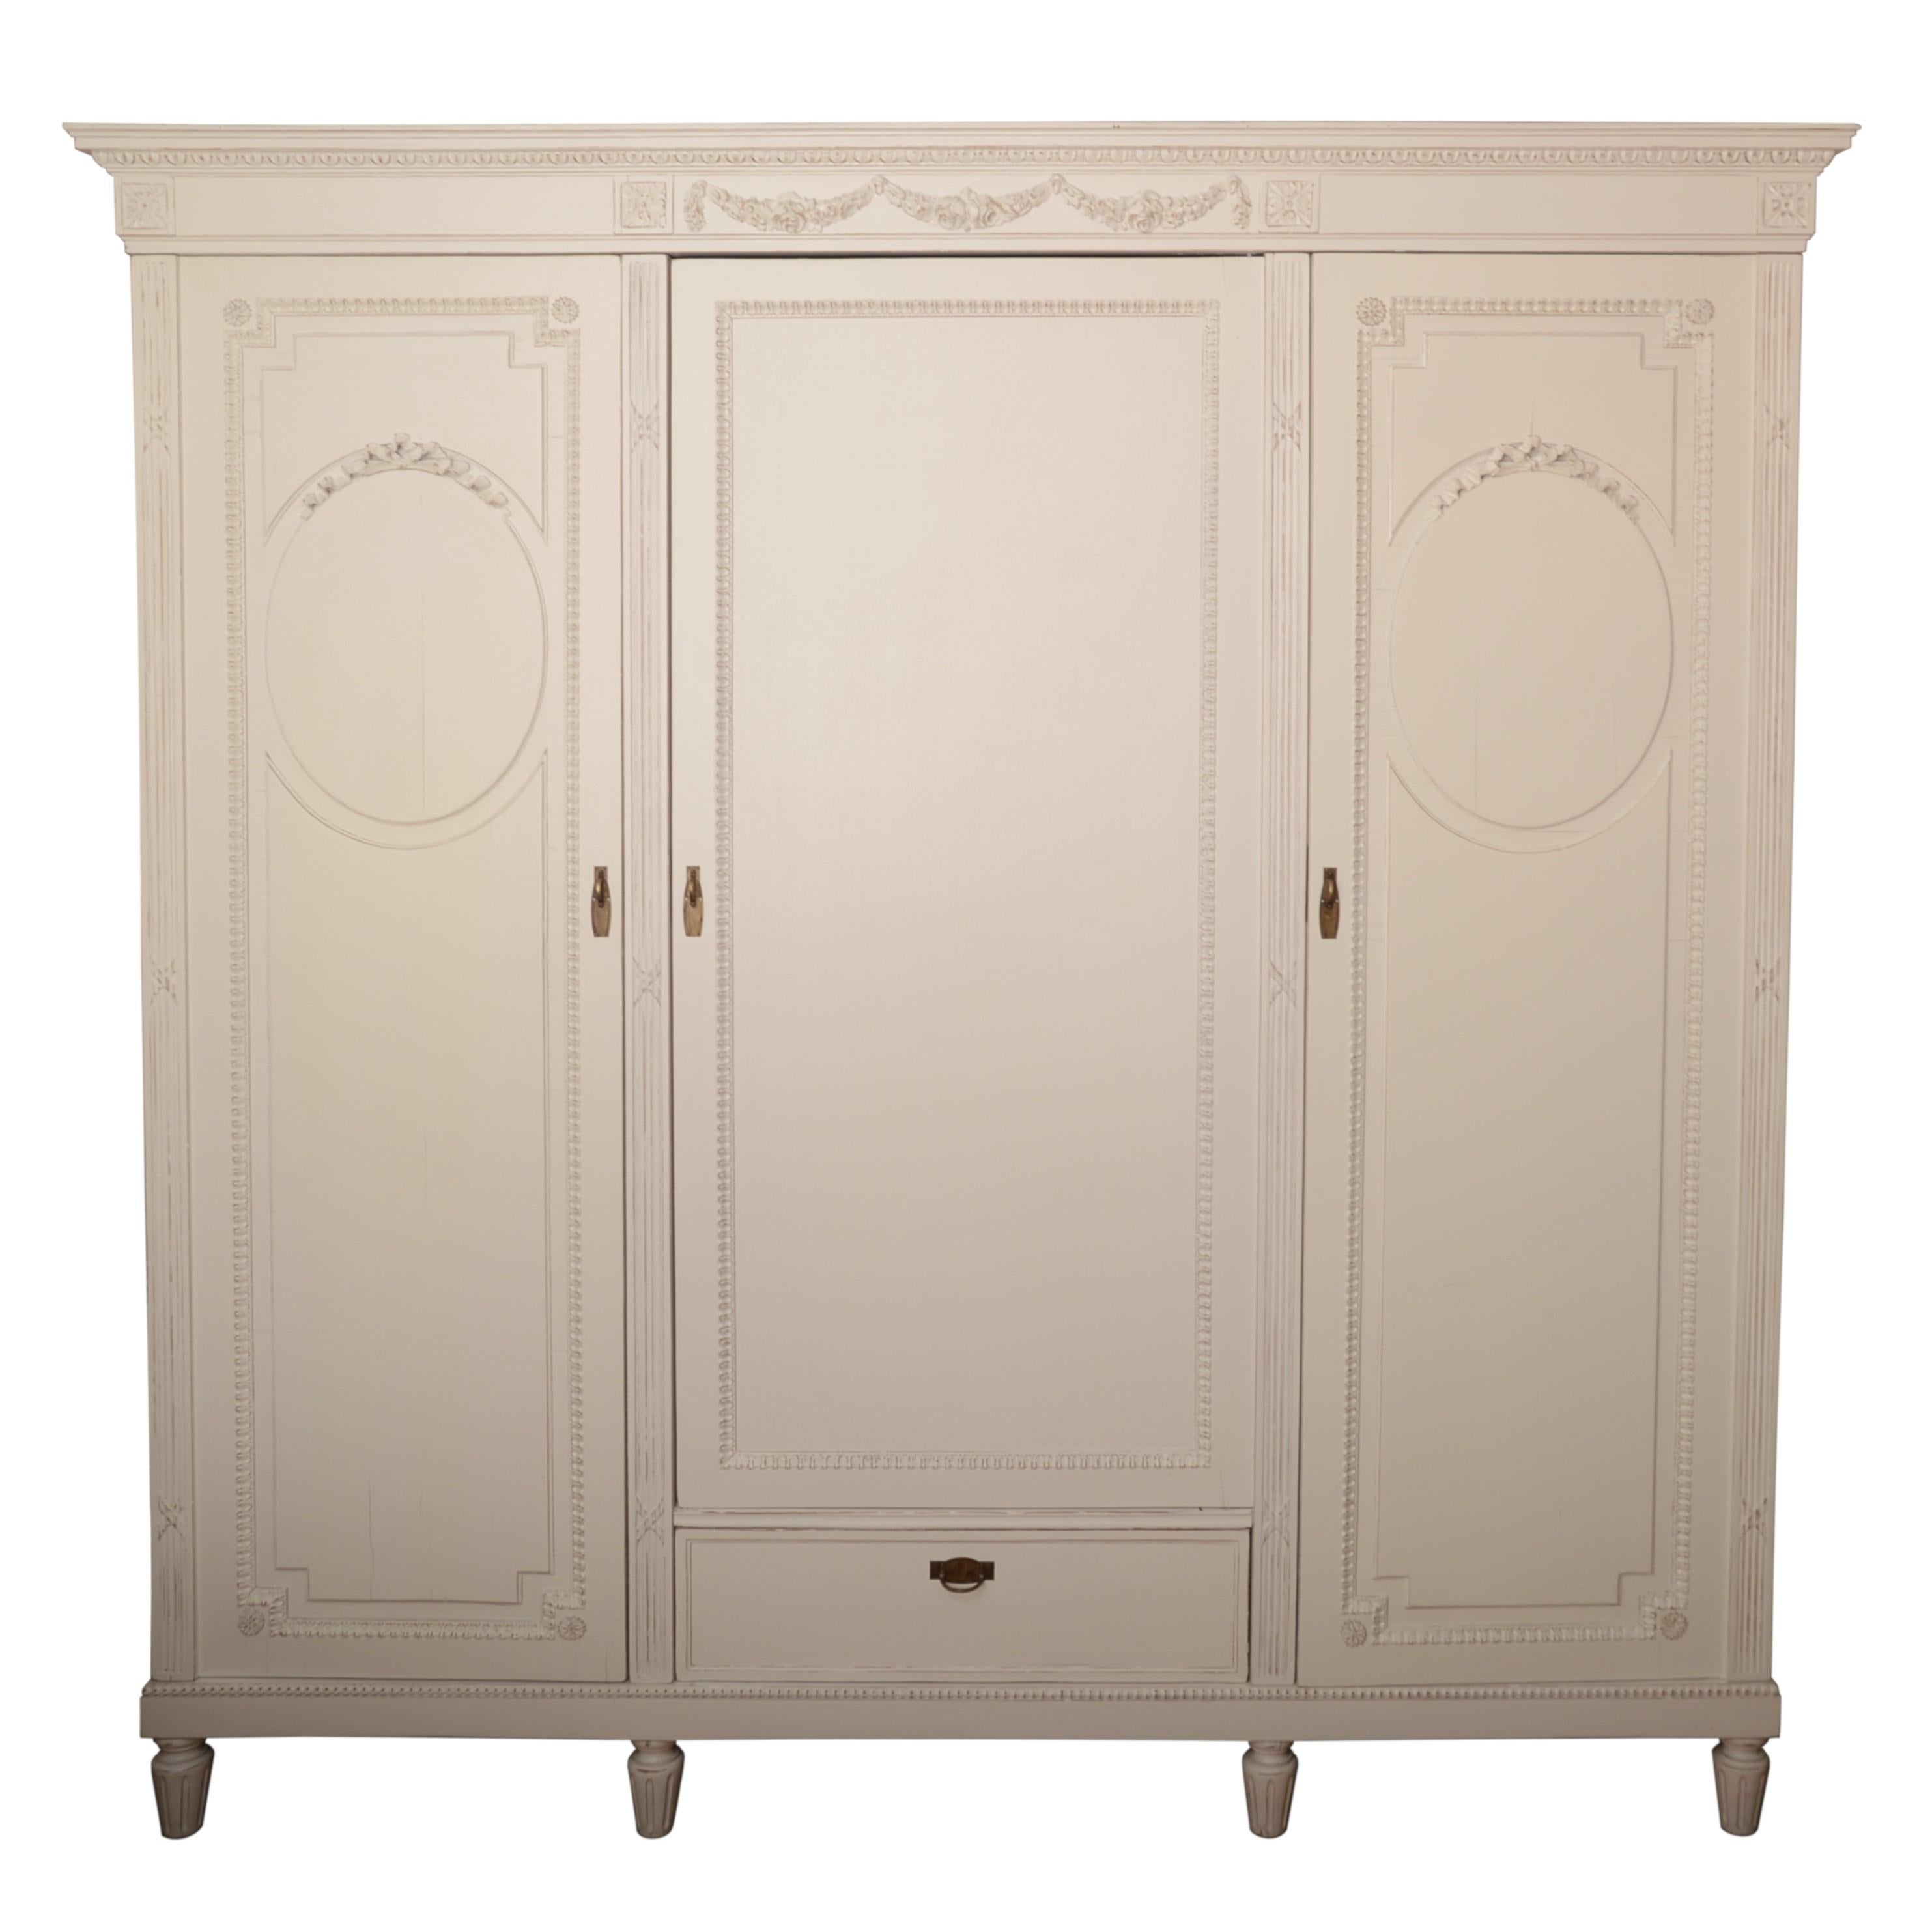 Early 20th Century Wardrobe in Louis XVI Style, Shabby Chic For Sale